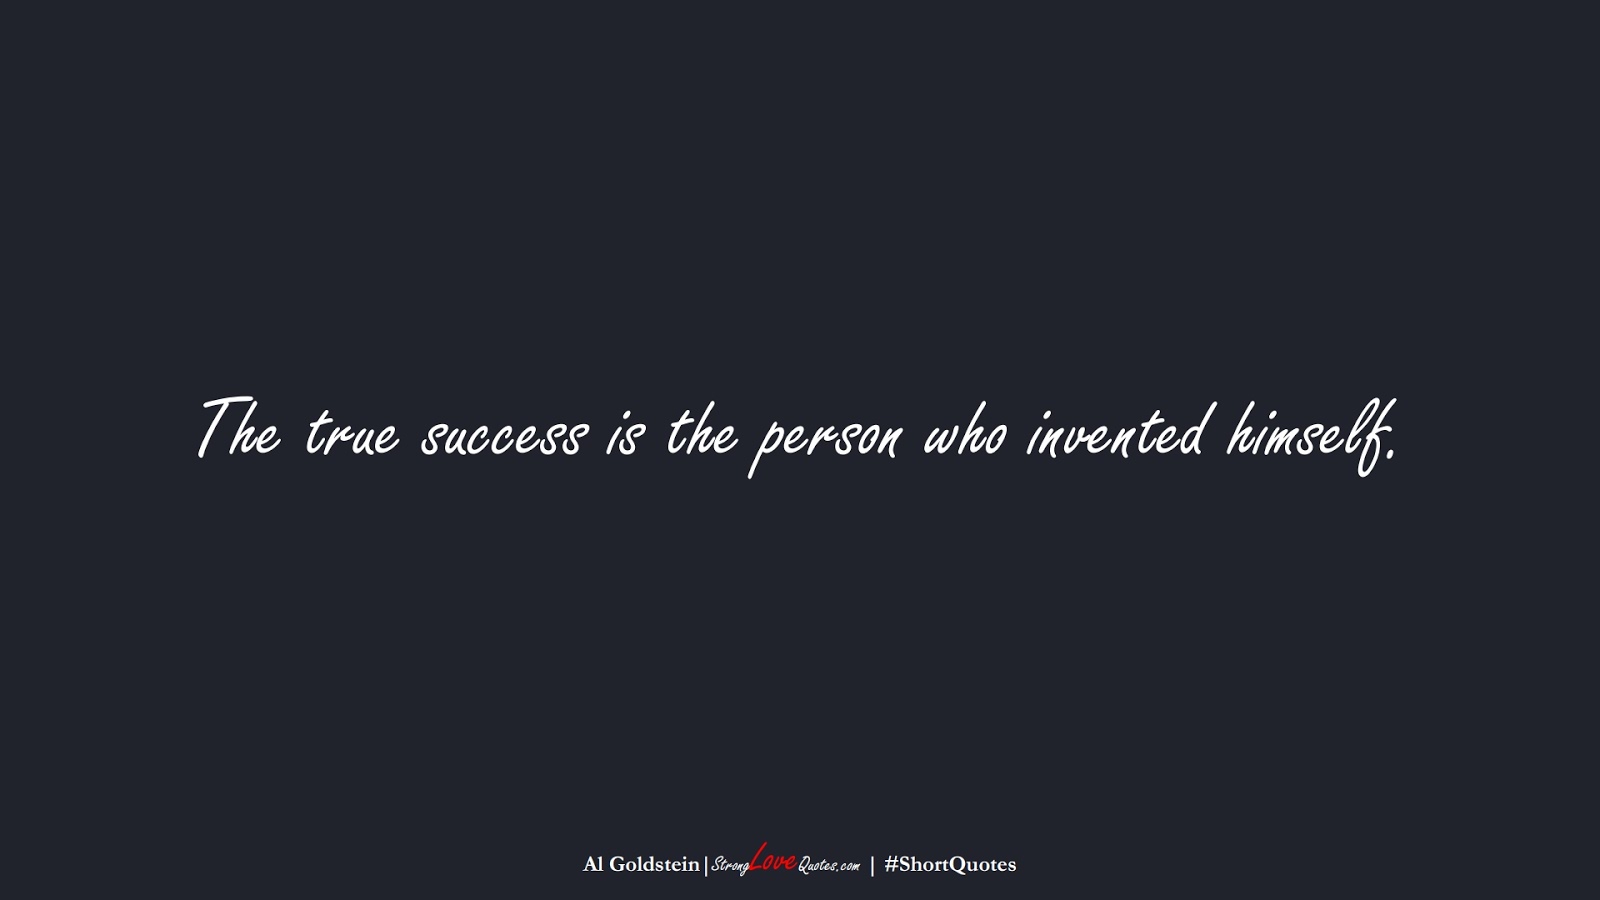 The true success is the person who invented himself. (Al Goldstein);  #ShortQuotes